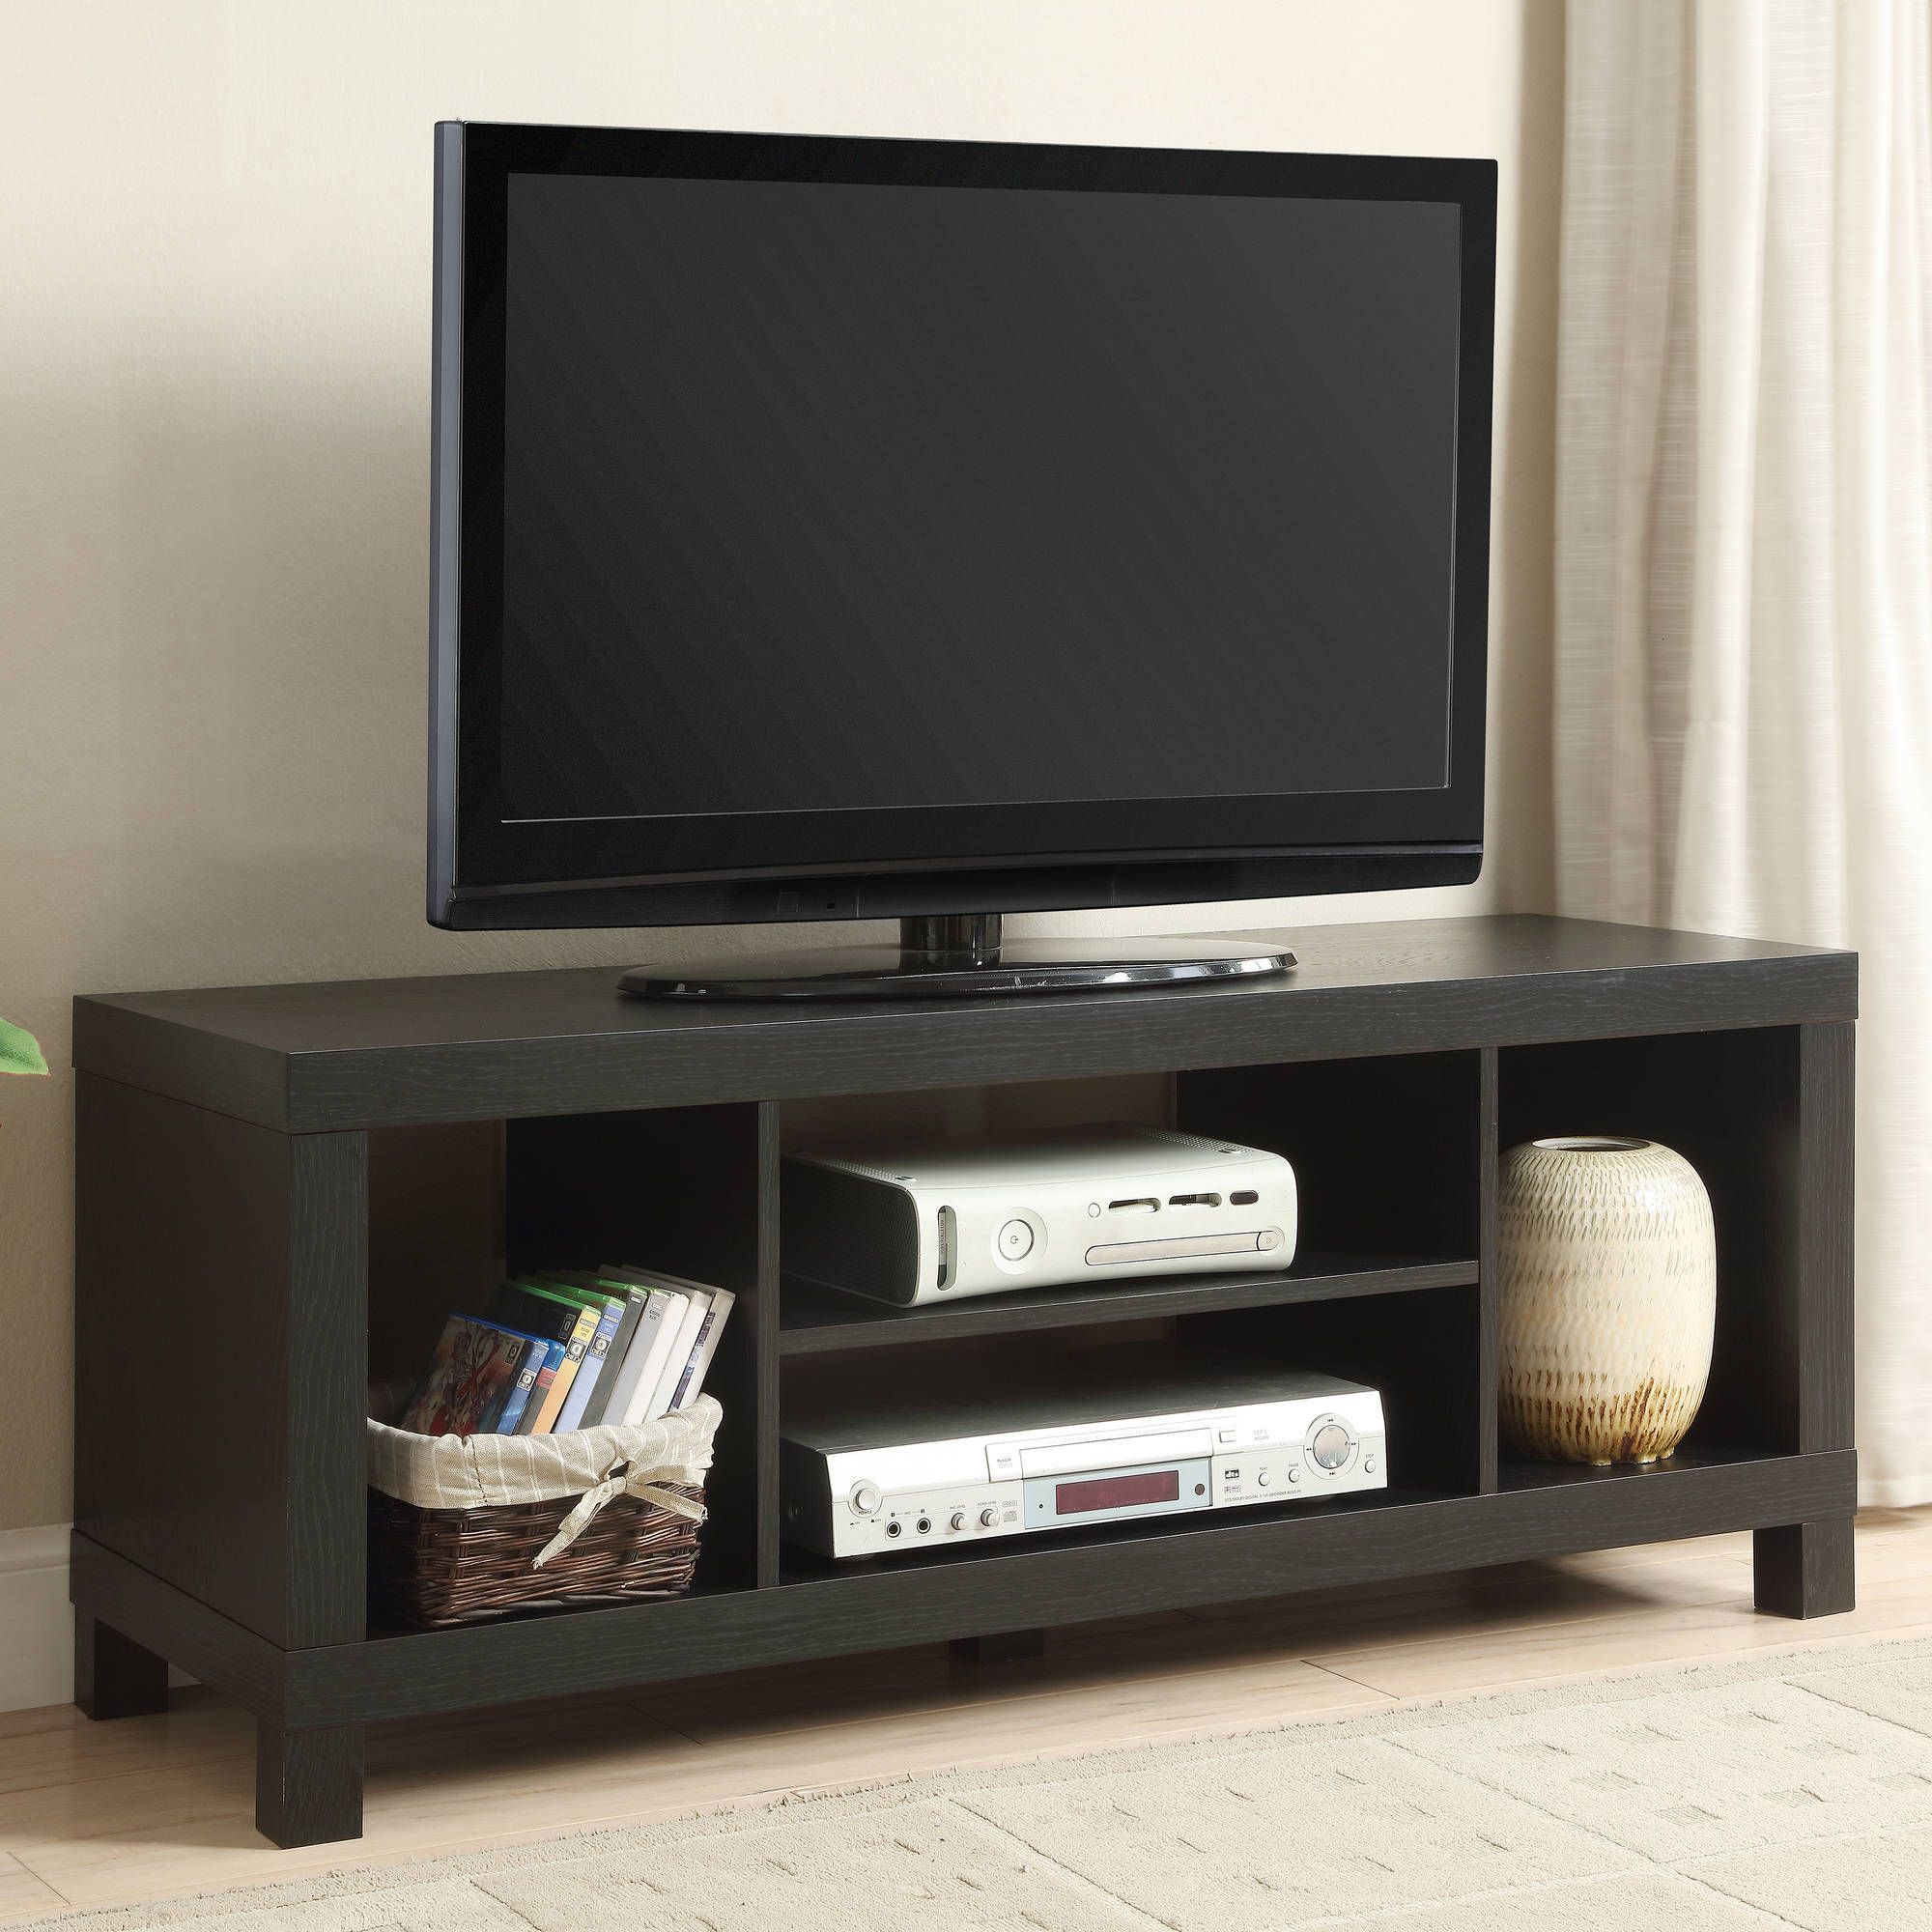 Tv Stand Entertainment Center Home Theater Media Storage Inside Modern Black Tabletop Tv Stands (View 7 of 15)